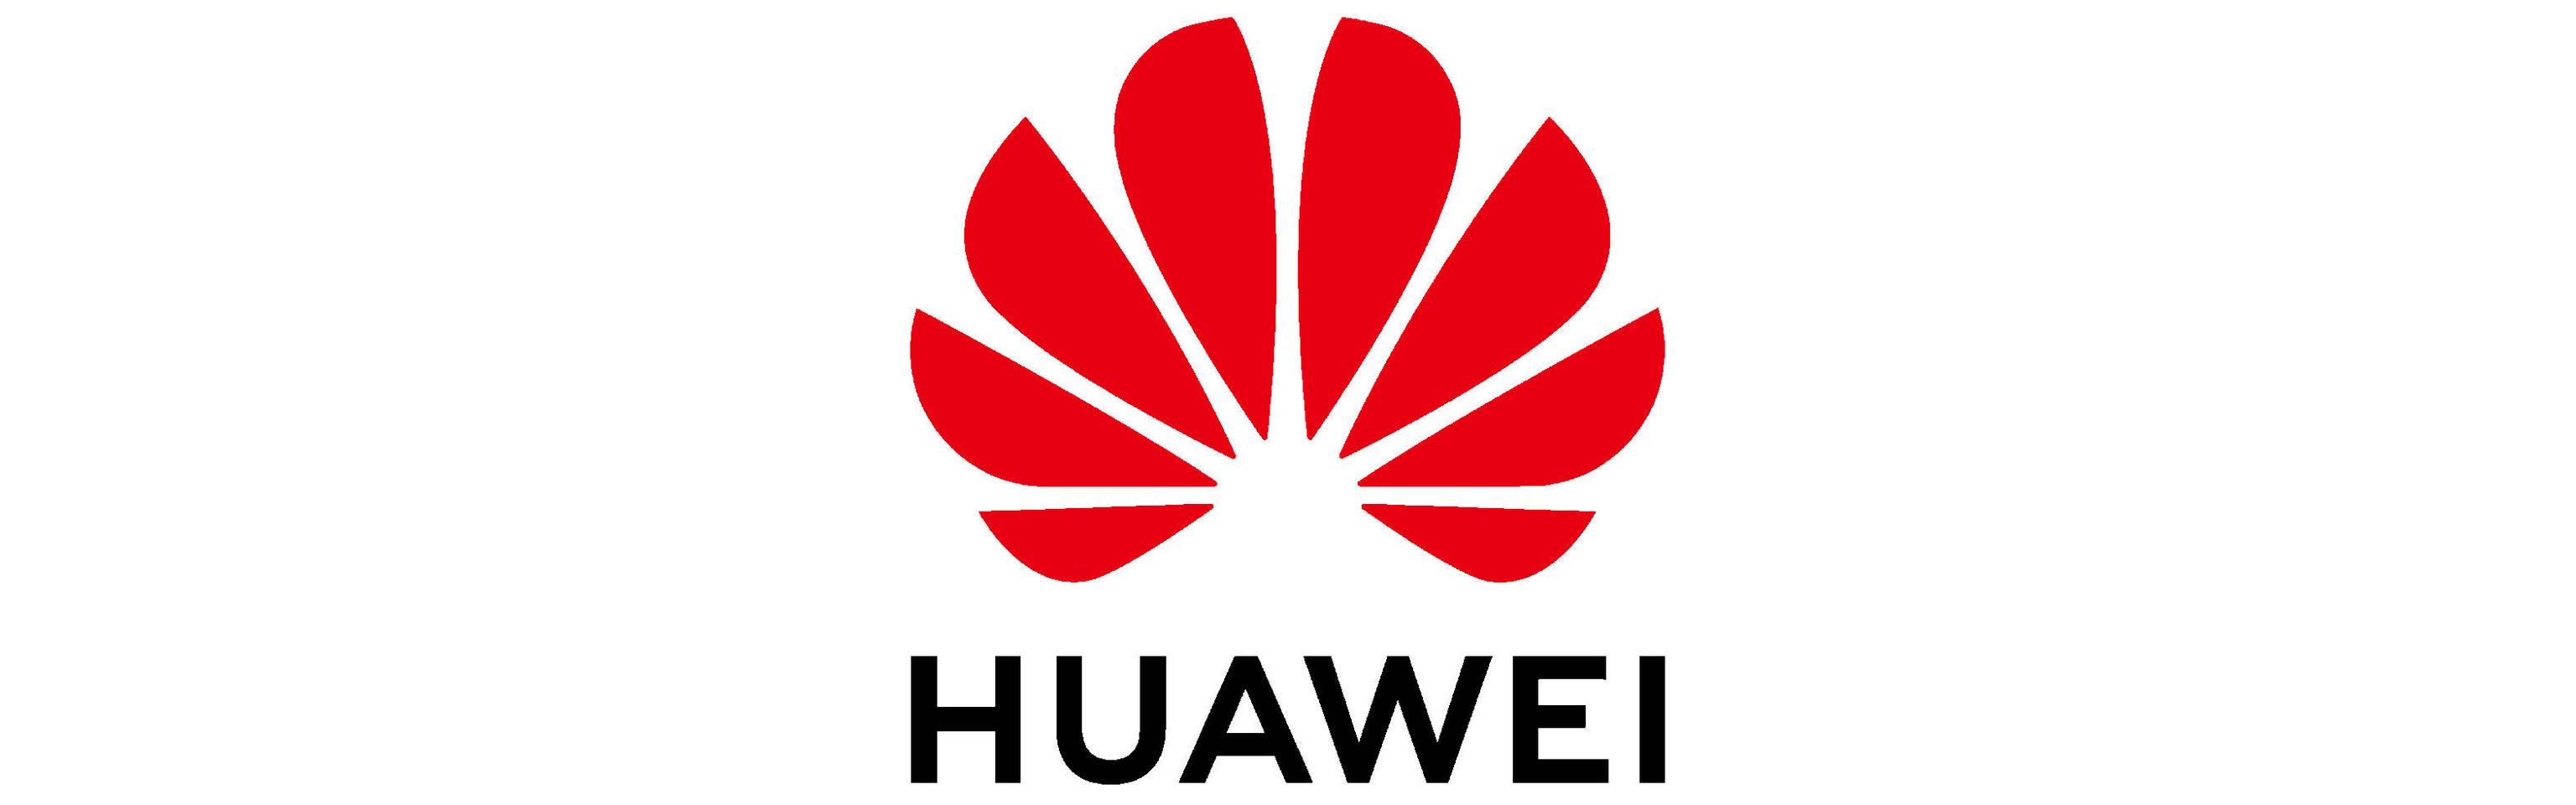 Huawei Announced The Realization Of Self Developed And Controllable Metaerp And Has Completed 